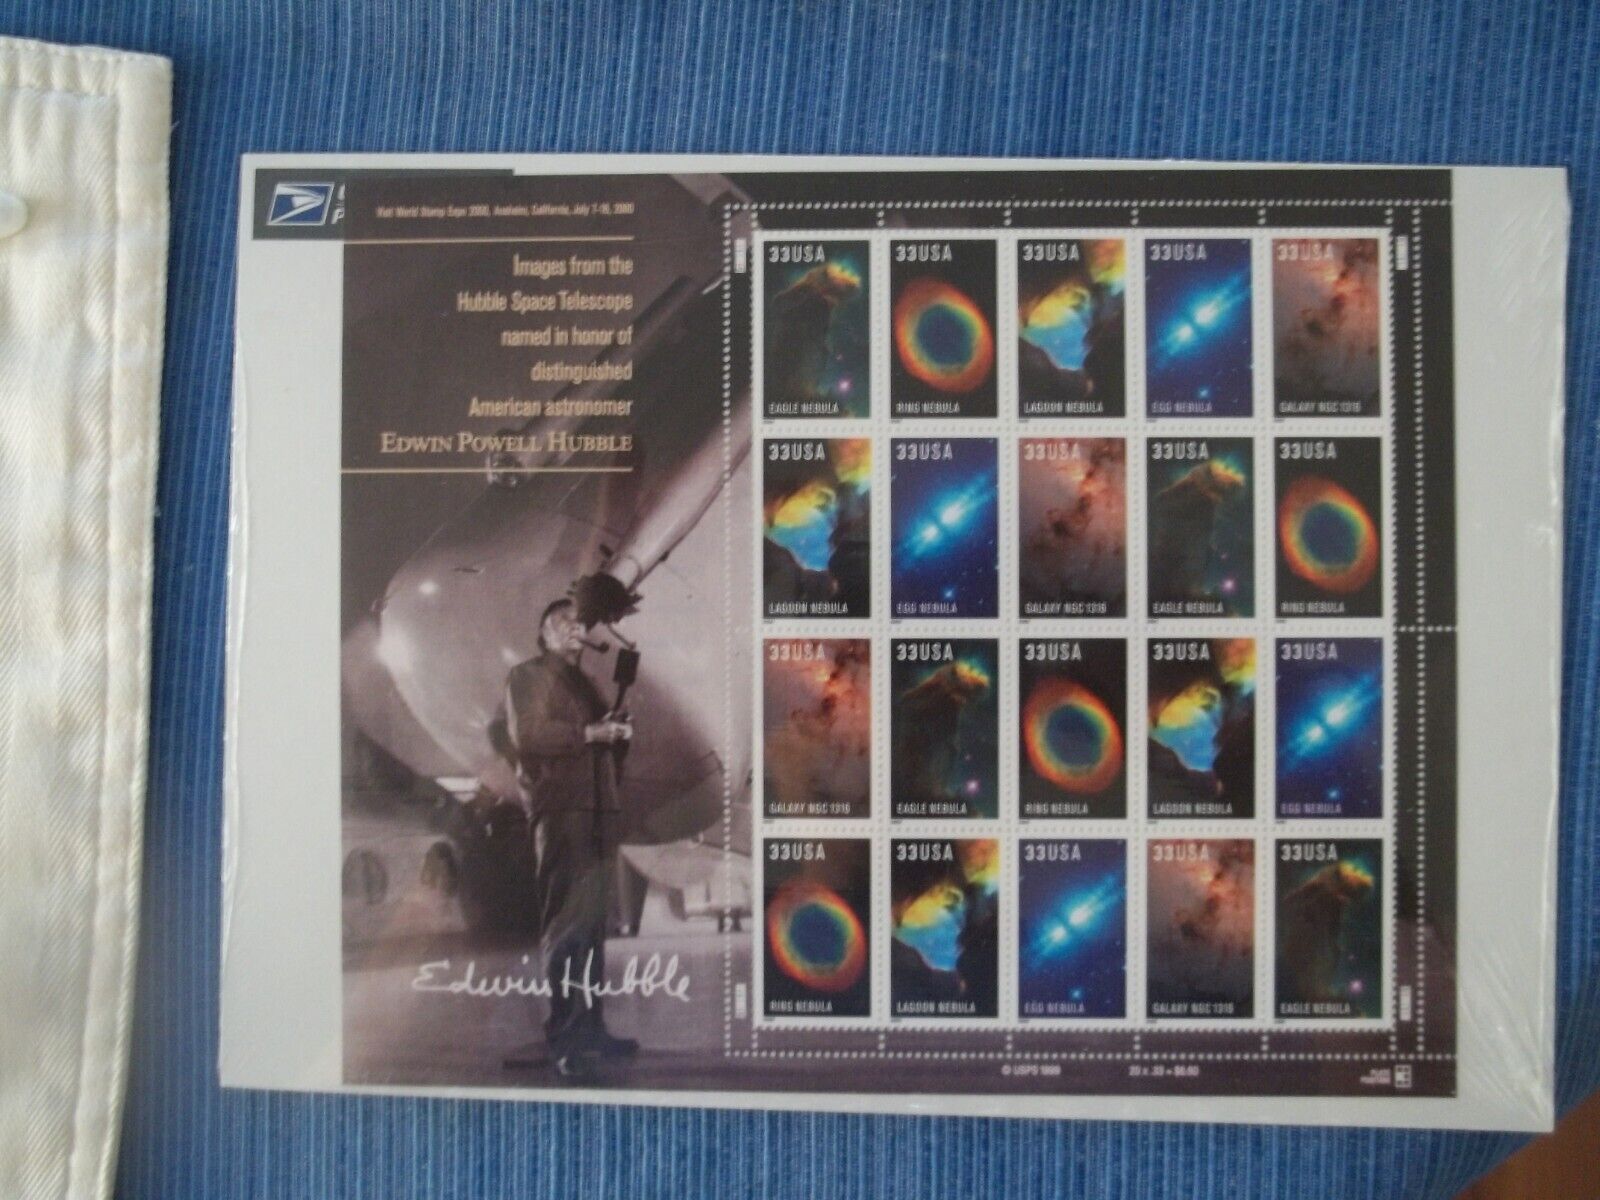 New in Original Packaging 2000 Hubble Space Telescope Images Mint+ Sheet 20